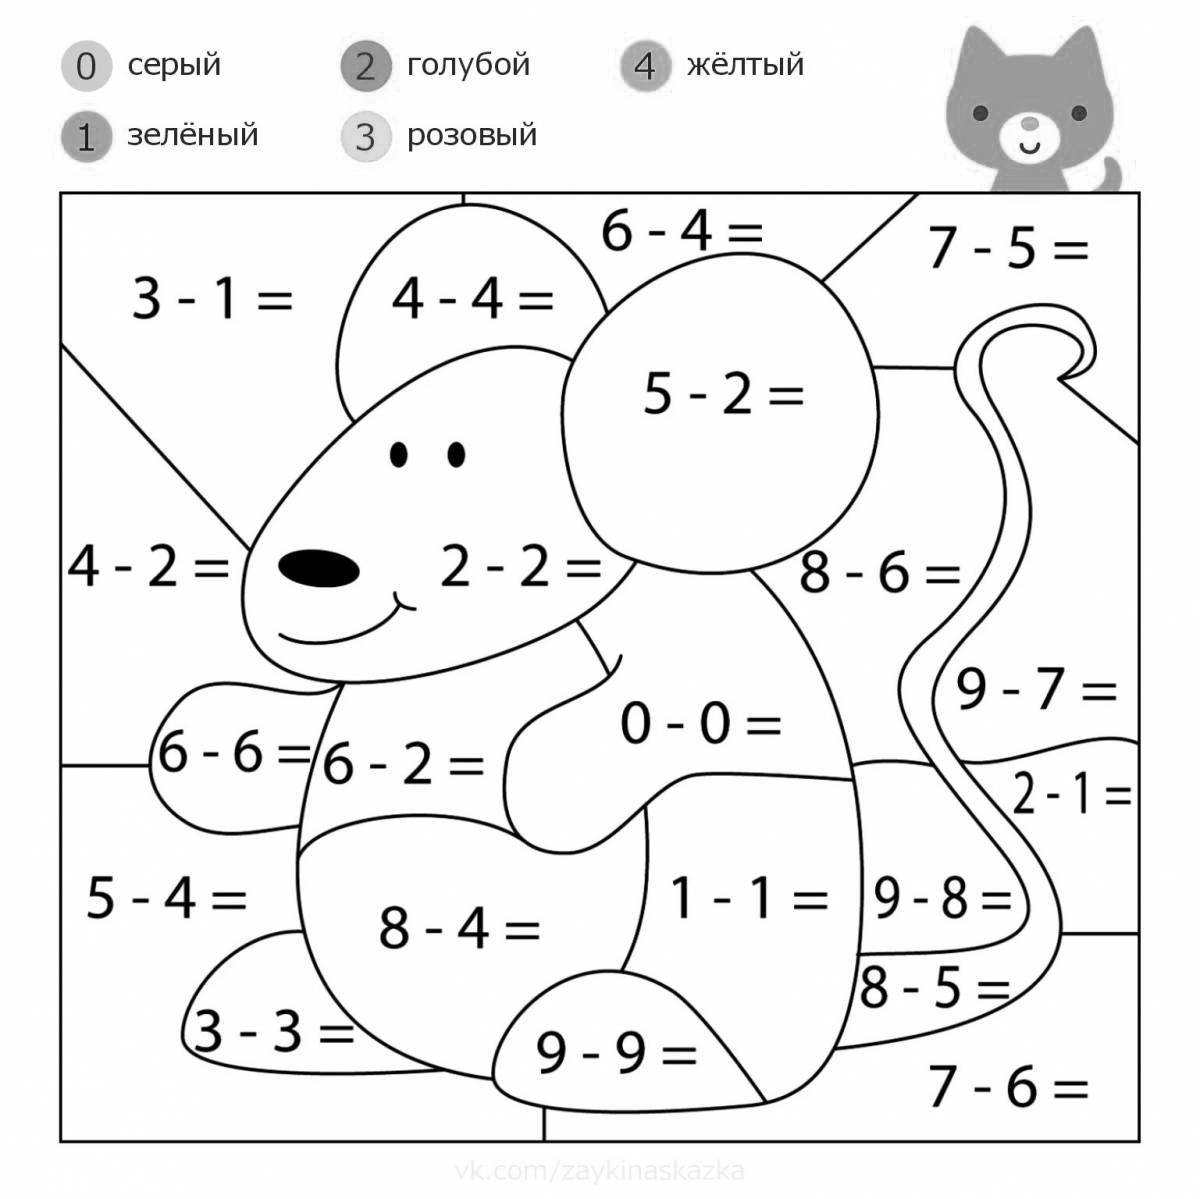 Fun math coloring book for preschoolers 5-6 years old